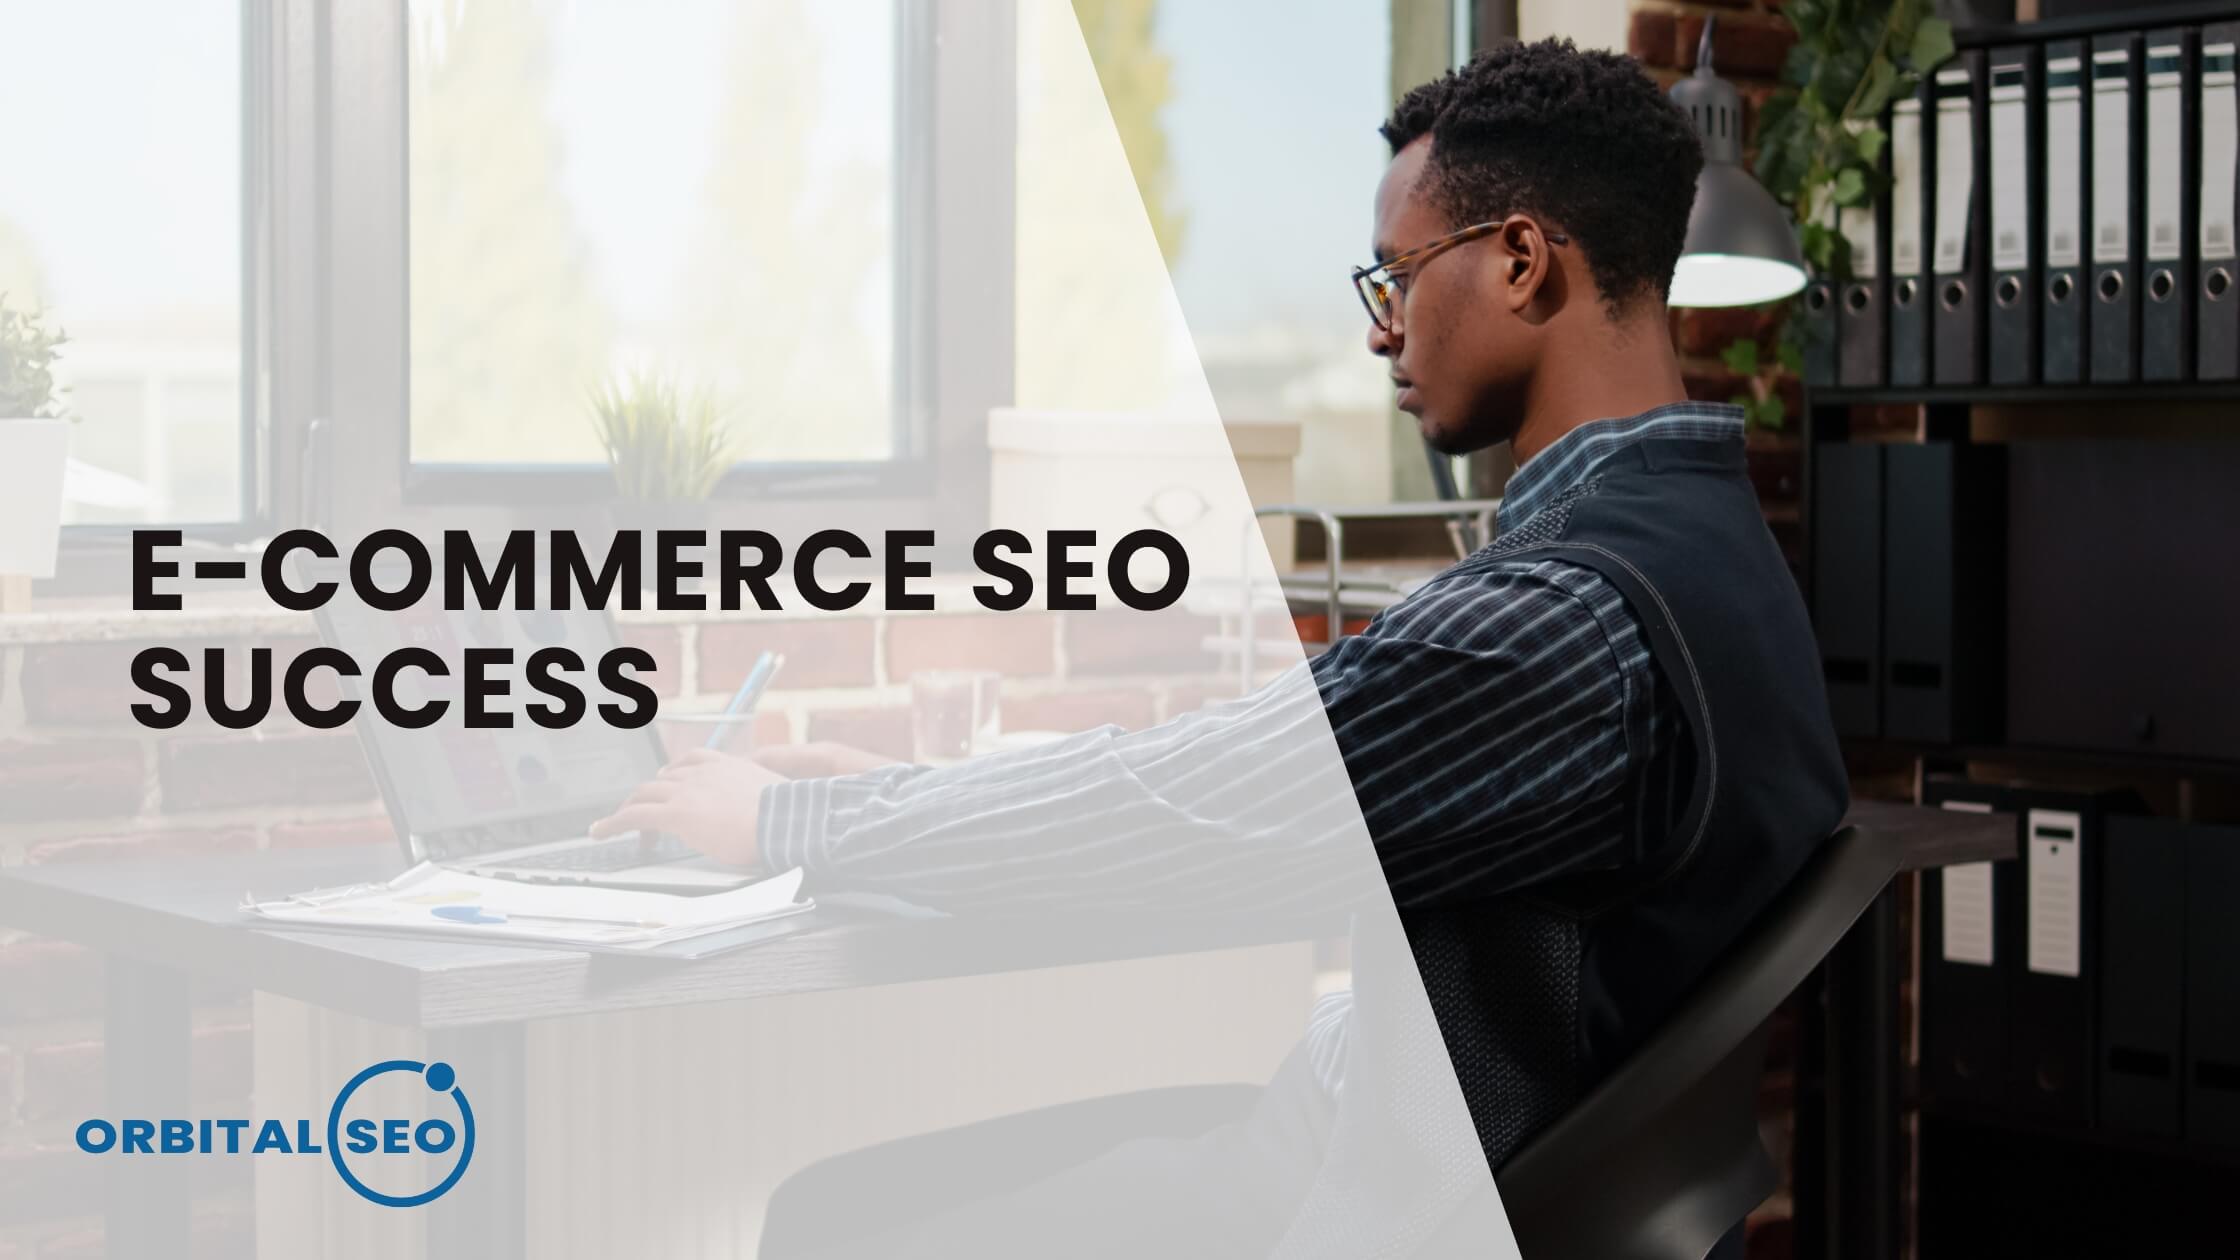 Analyzing the Impact of SEO on E-Commerce Success in Los Angeles